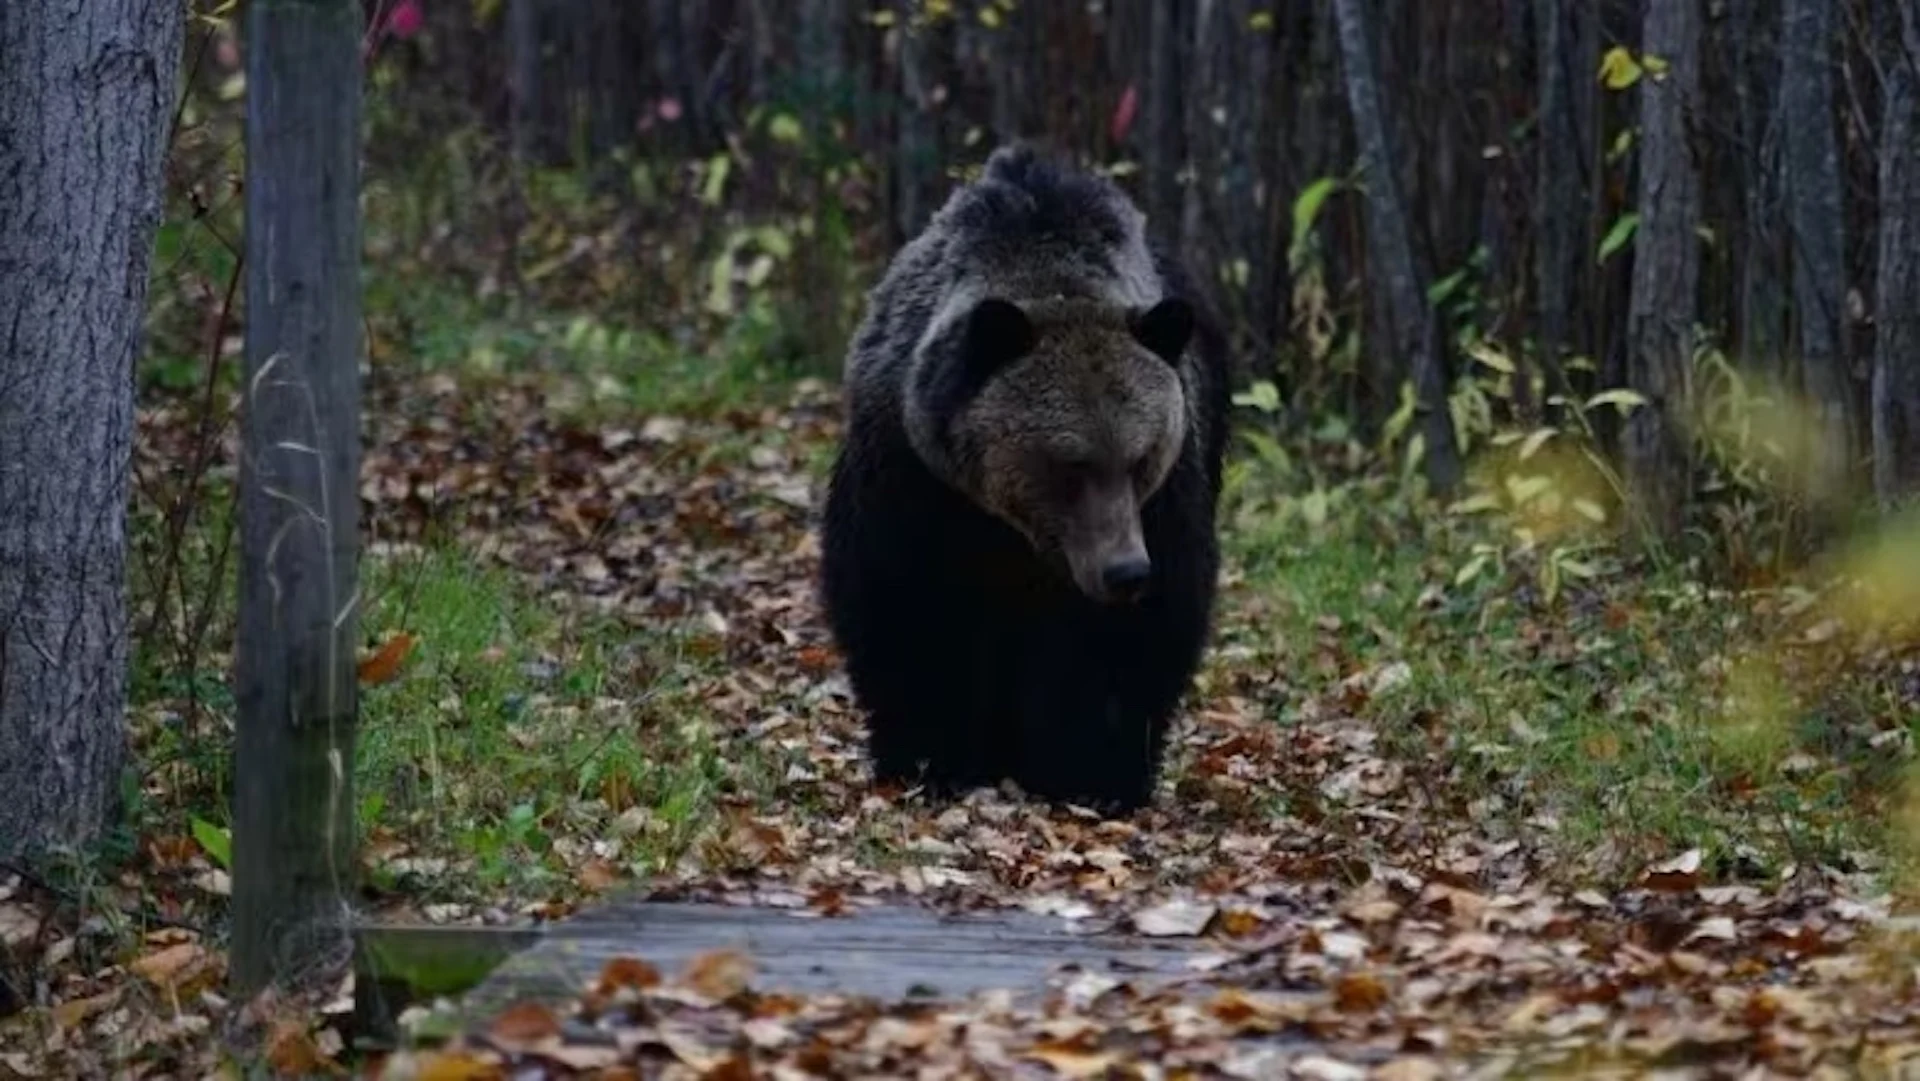 Grizzly bears roaming in B.C. cities reflect 'kind of a weird year' for wildlife